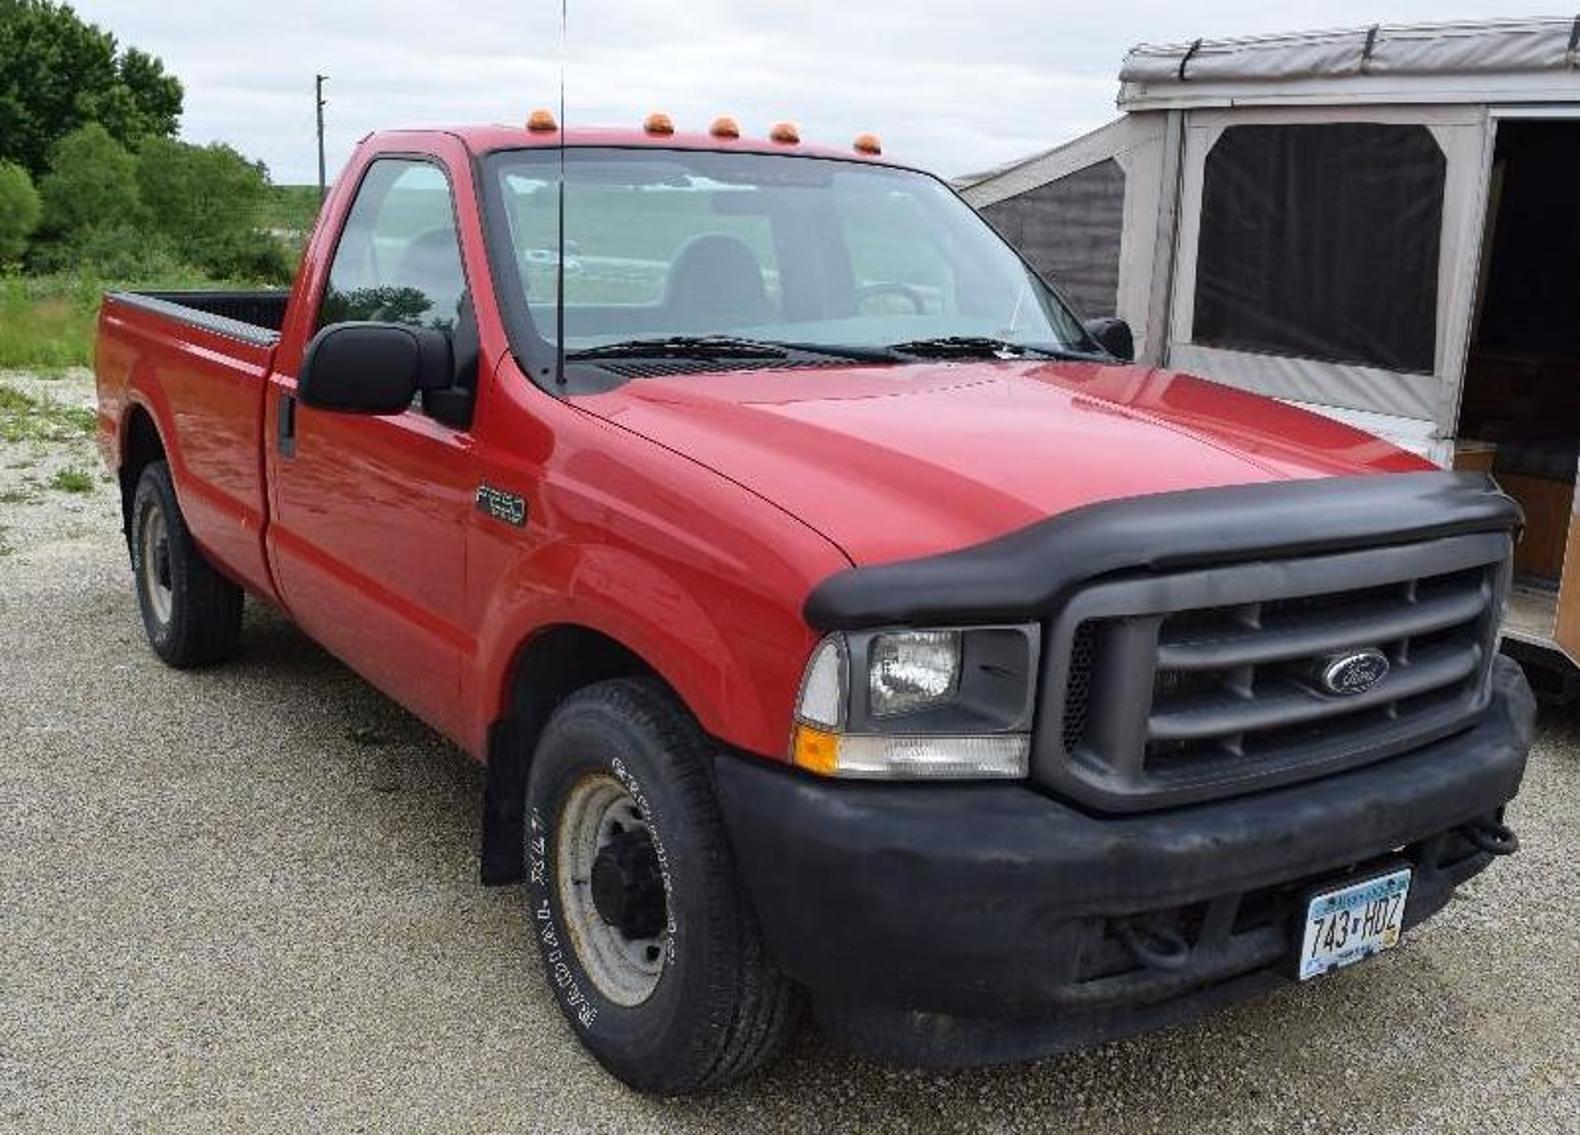 (12) RV's - 2003 Ford F-250